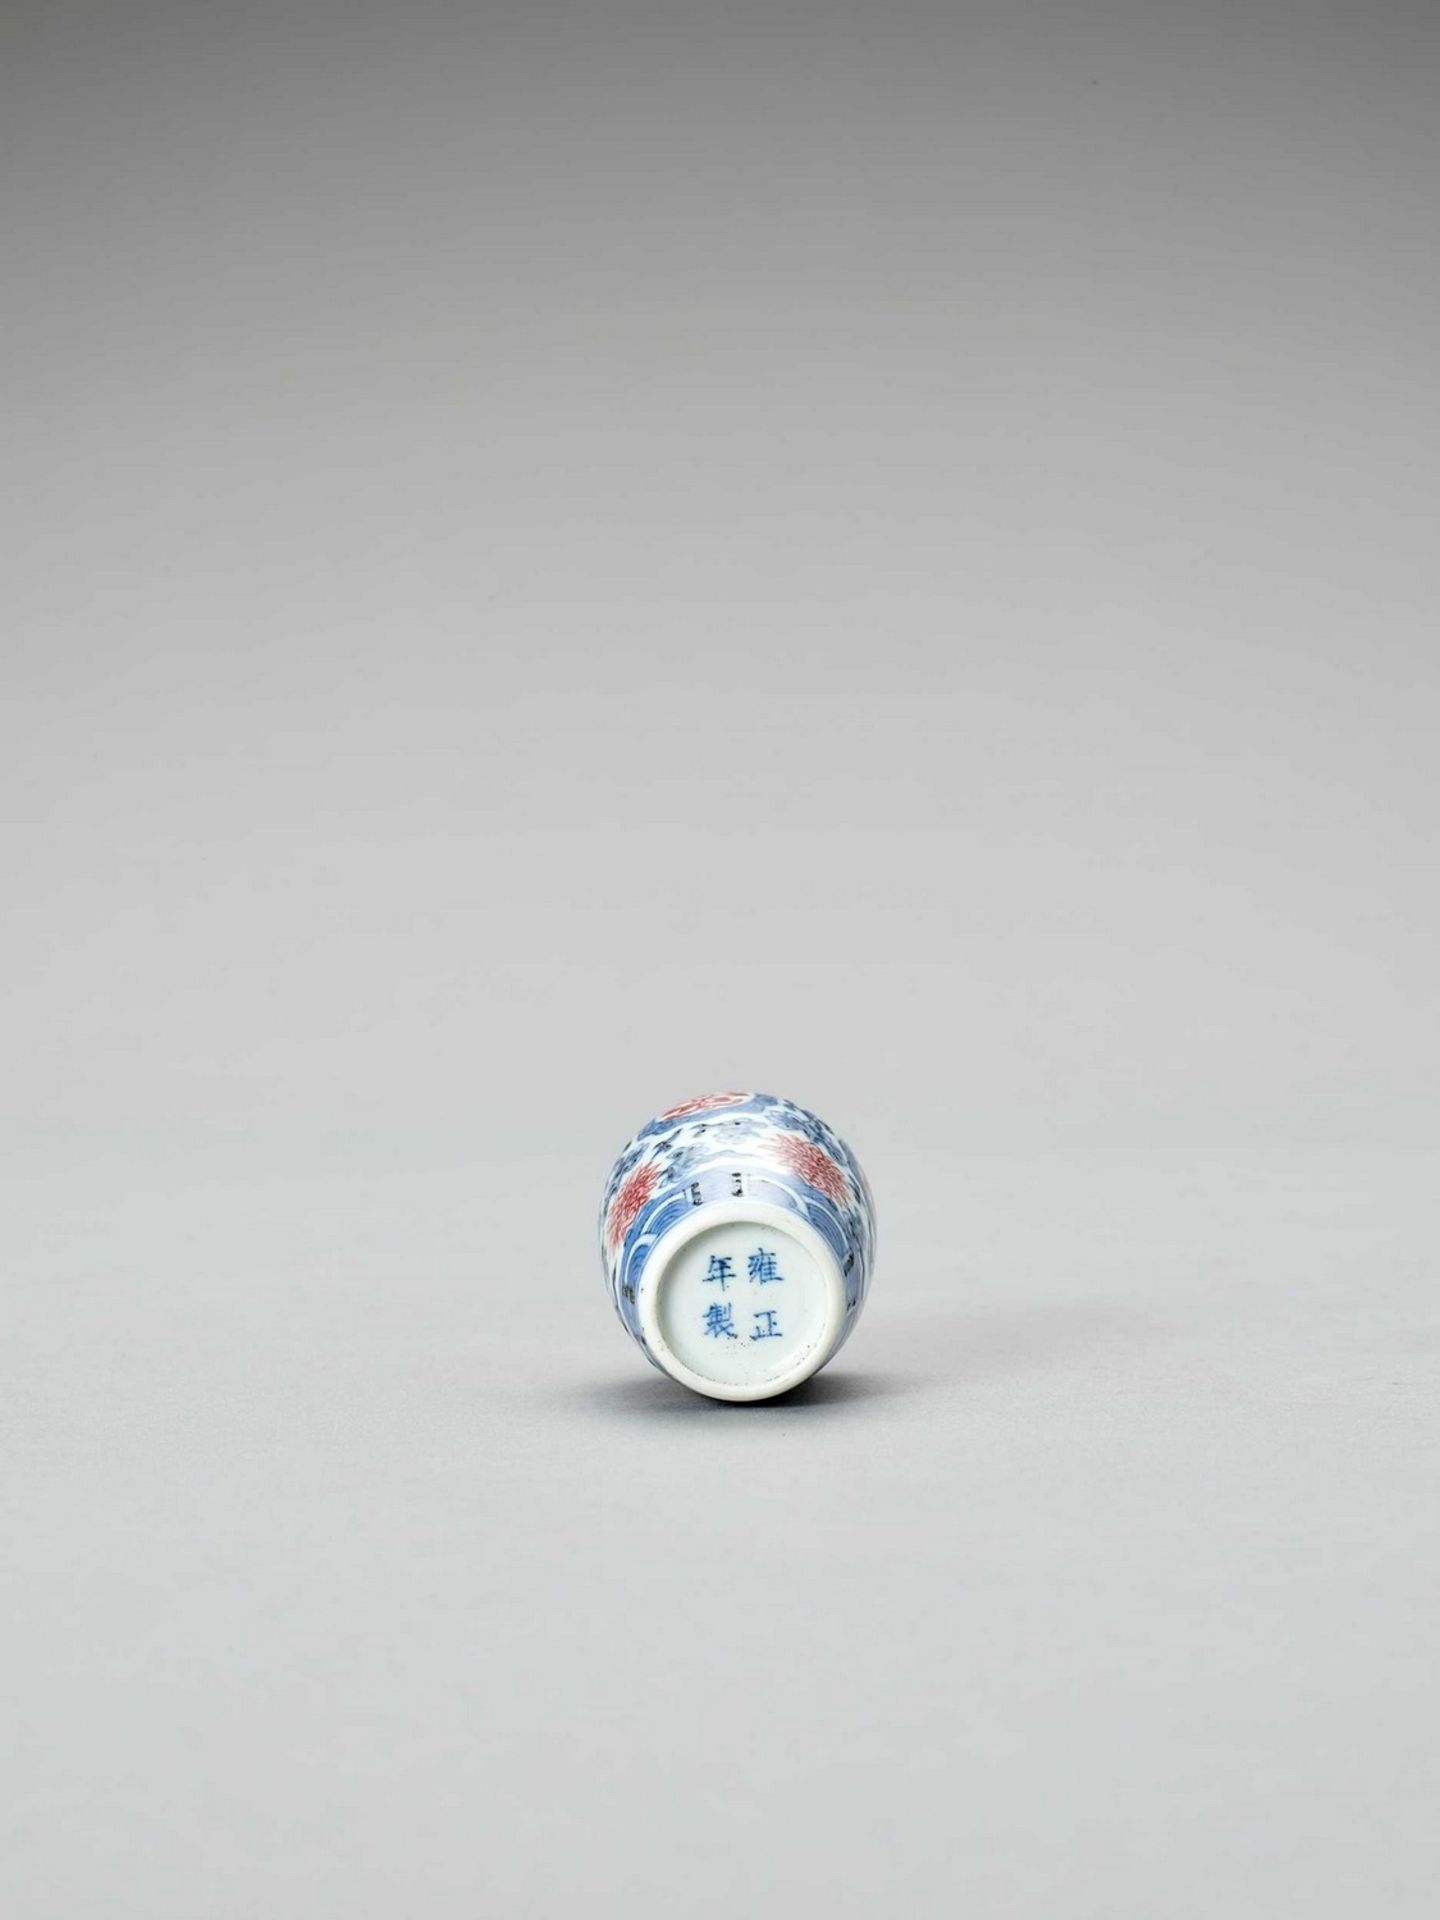 AN IRON-RED, BLUE AND WHITE PORCELAIN SNUFF BOTTLE - Image 6 of 6